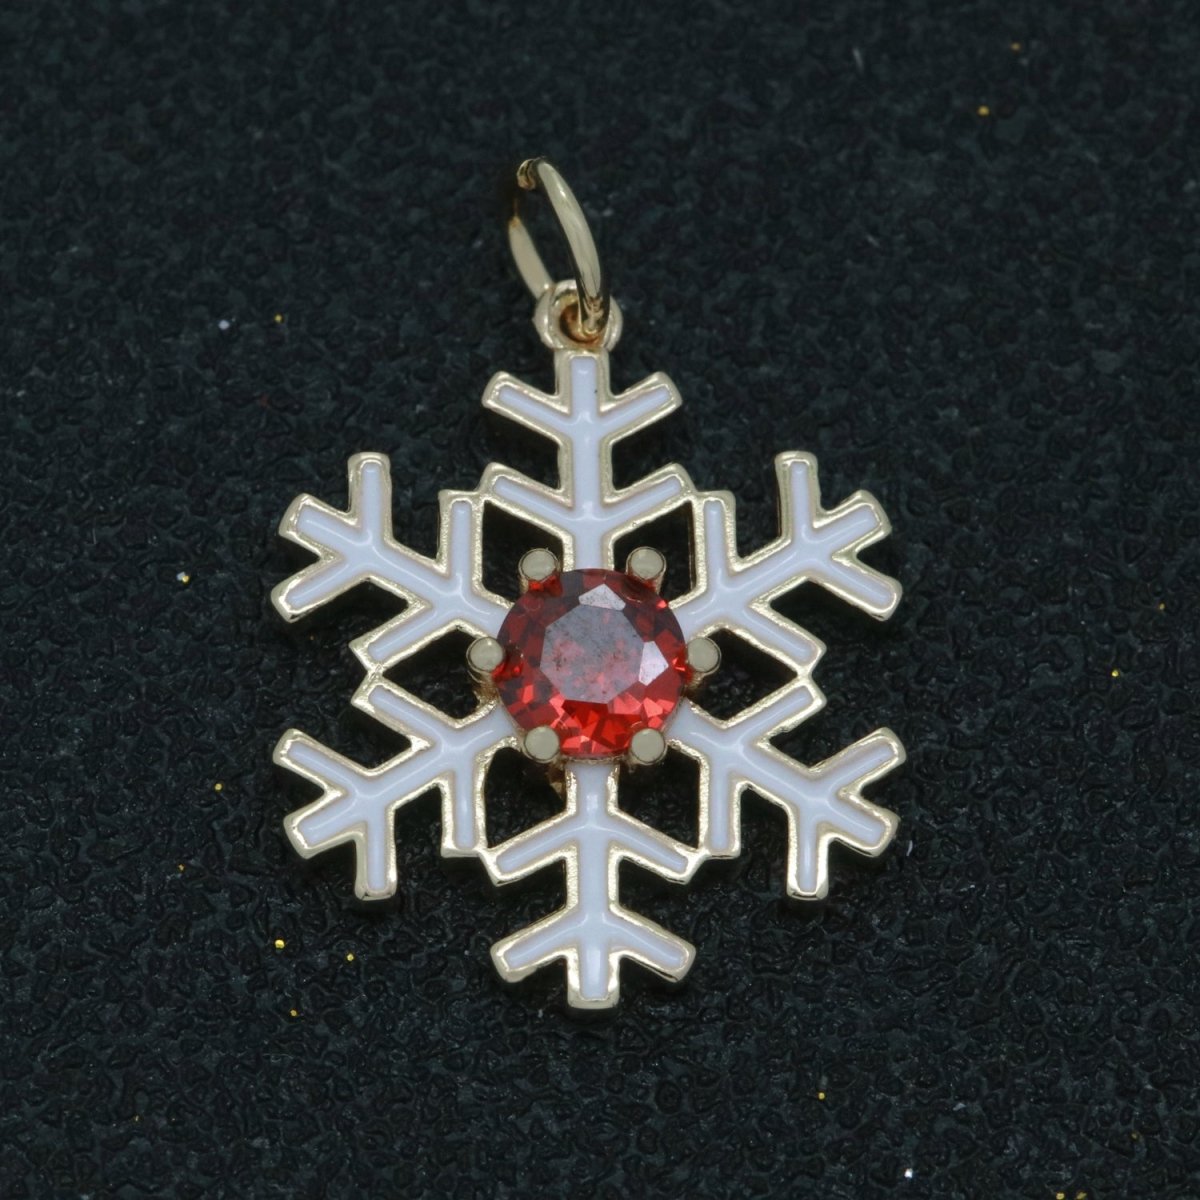 14k Gold Filled 24x16.5mm Wholesale Gold Snowflake Pendant with Red Cubic Zirconia Stone Pendant for Necklace Bracelet Earring Making M-719 - DLUXCA